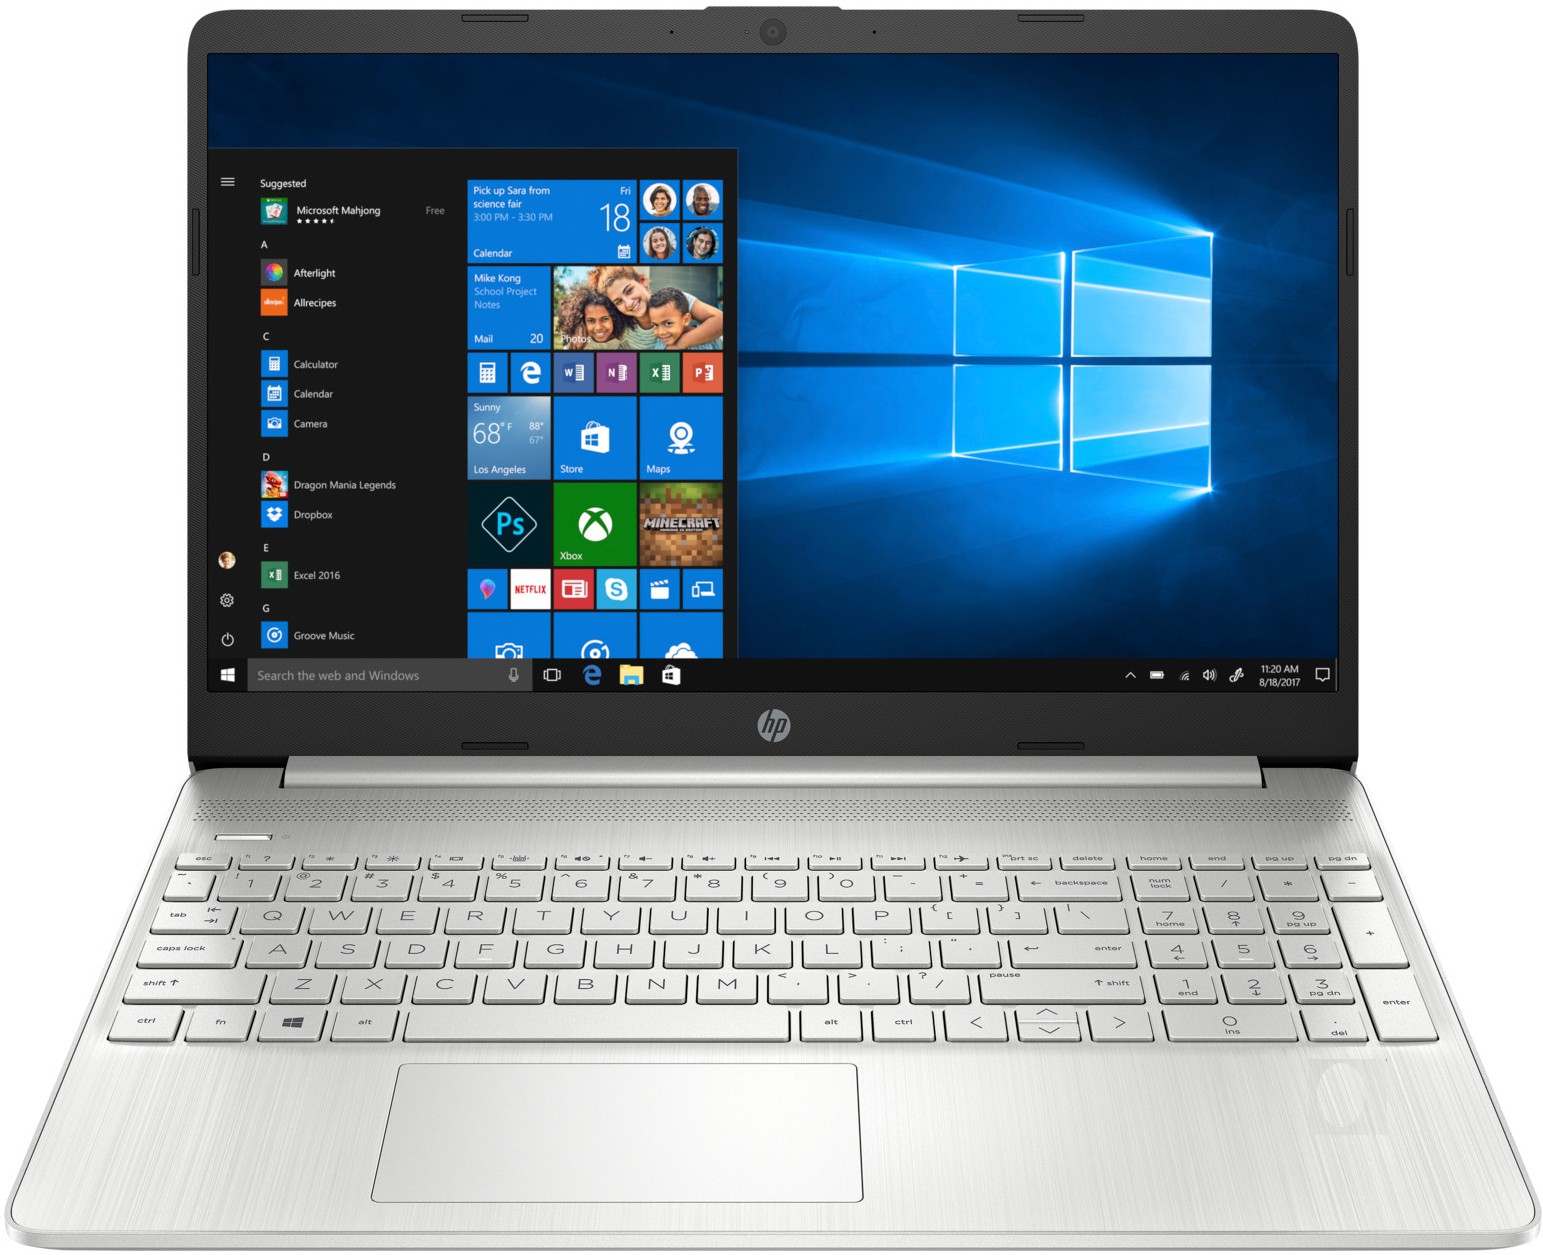 HP 15s Ryzen 3 Dual Core 3200U - (4 GB/512 GB SSD/Windows 10 Home) 15s-eq0063au Thin and Light Laptop (15.6 inch, Natural Silver, 1.7 kg, With MS Office)